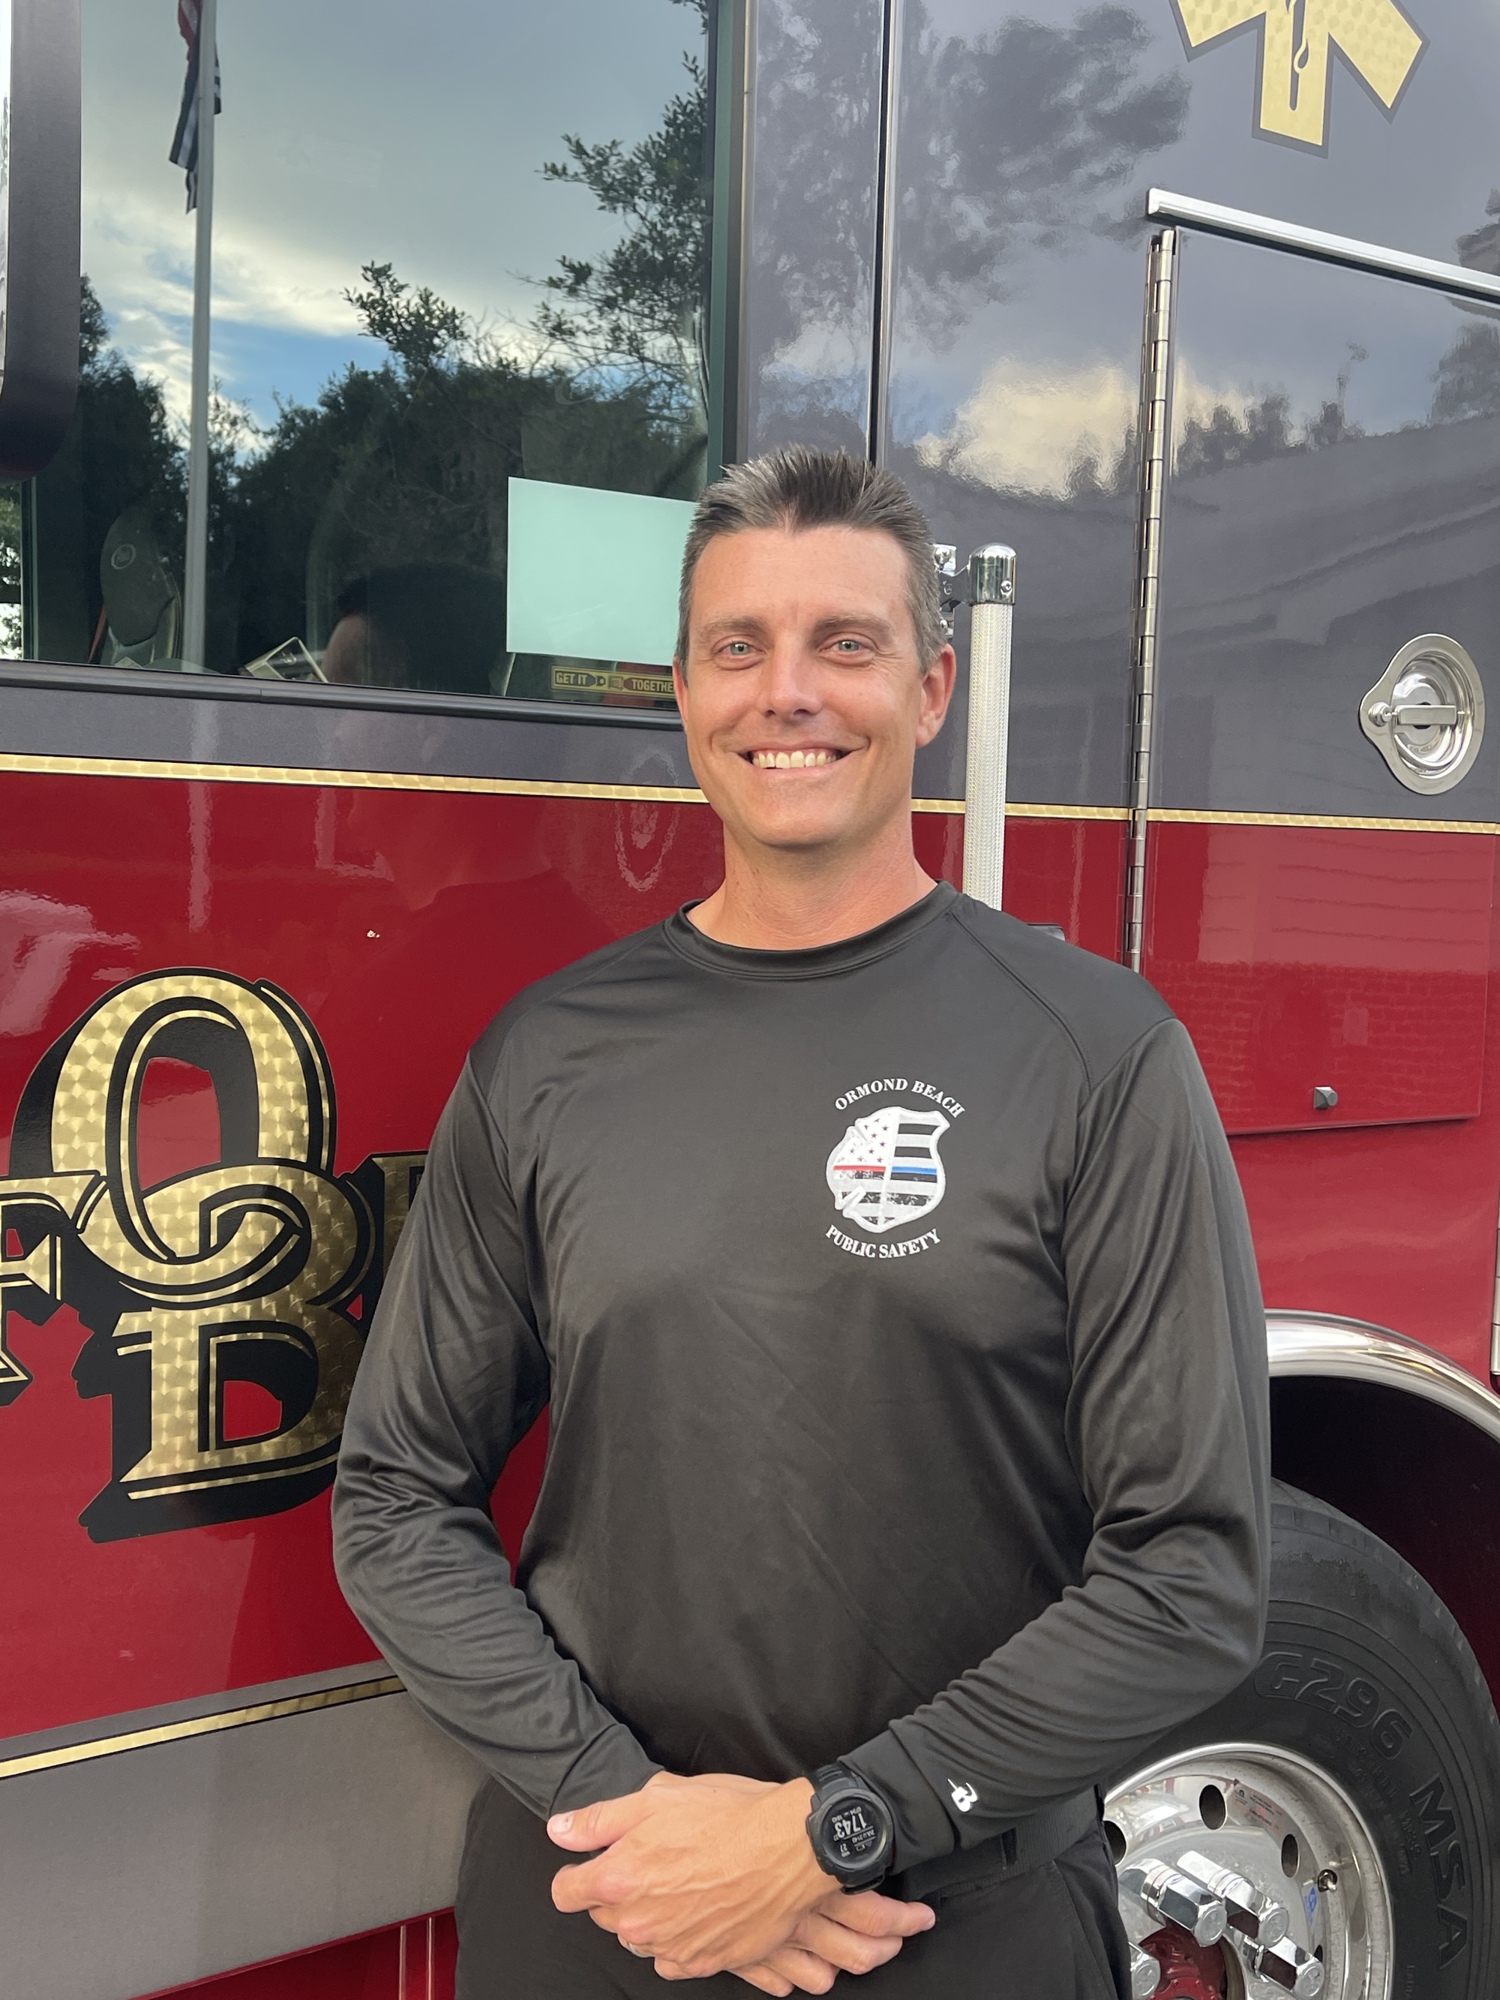 Ormond Beach Fire Battalion Chief Nate Quartier sports the new shirt, gifted by the city. Courtesy photo